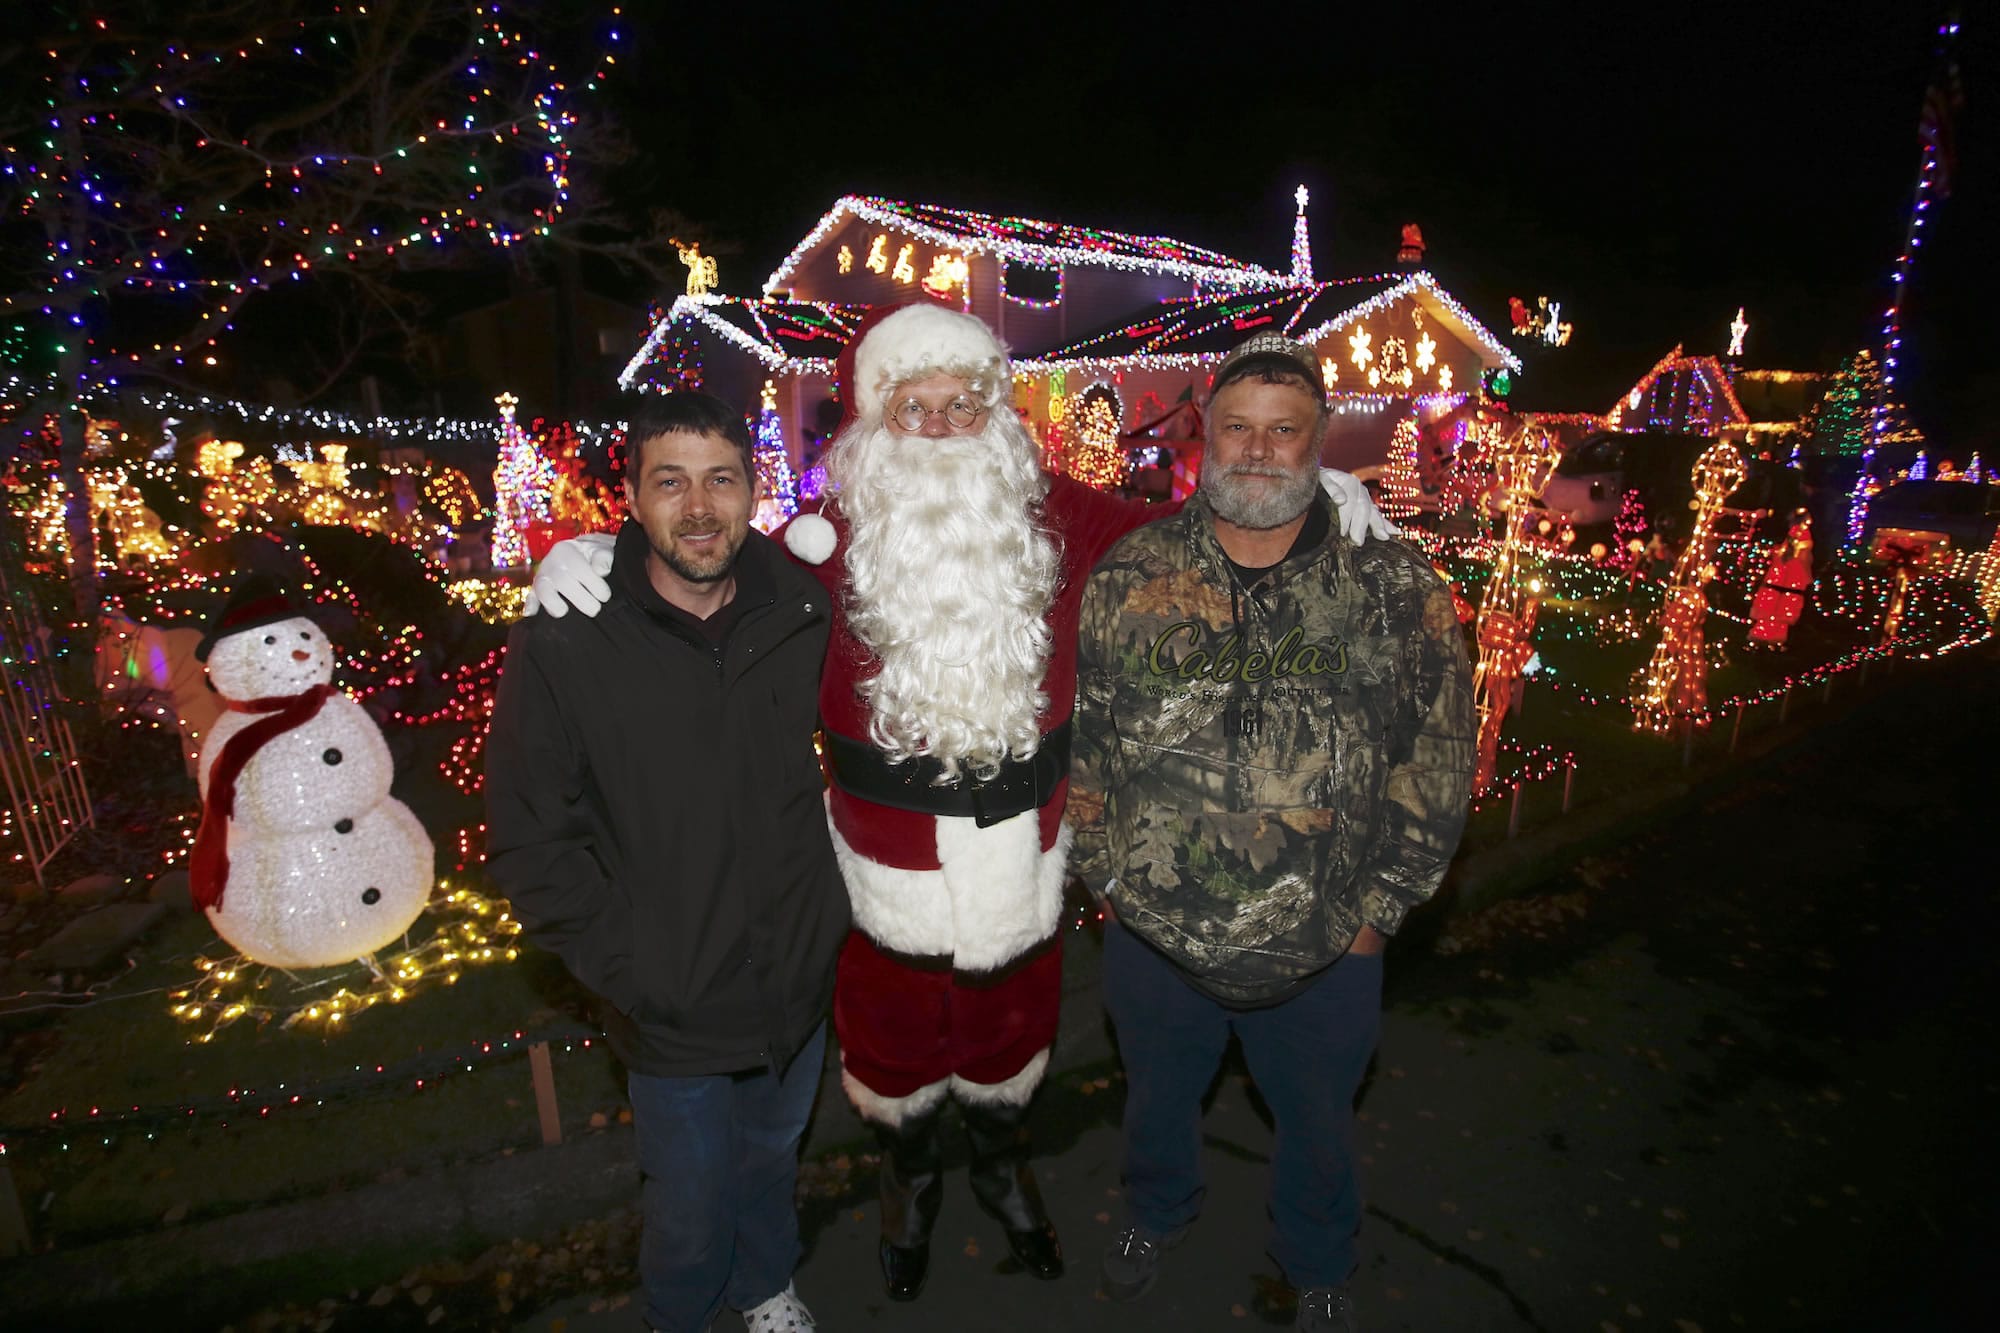 Randy Peppers, from left, David Buffum (dressed as Santa) and Paul Lamb have a friendly competition to show who can put up the most elaborate Christmas decorations at their homes on Southeast Riveridge Drive.